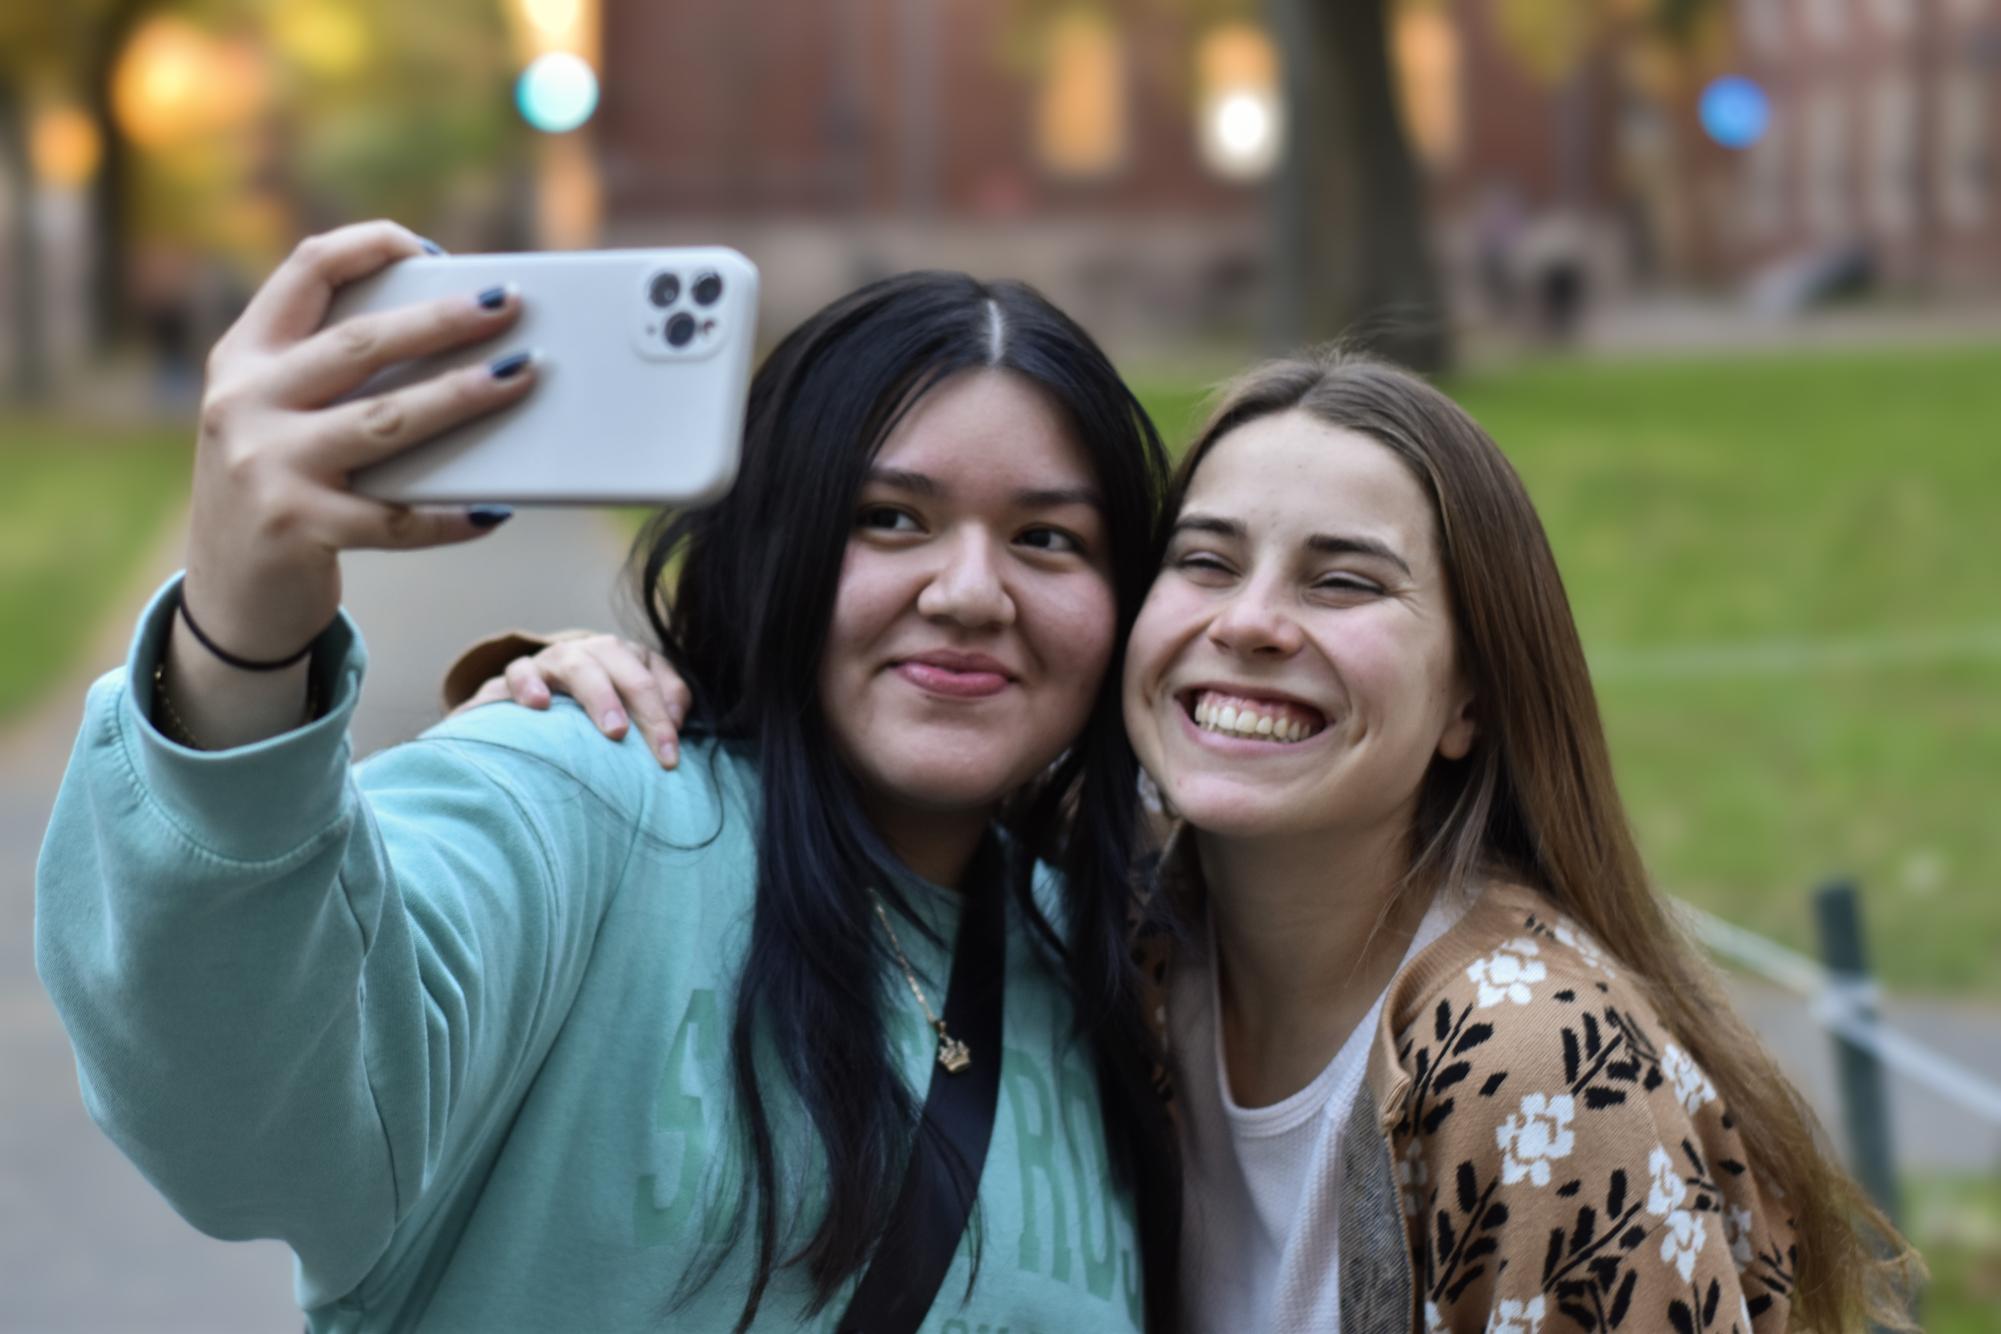 Junior Mayra Amantecatl and Senior Lucy Hiller smile for a selfie.